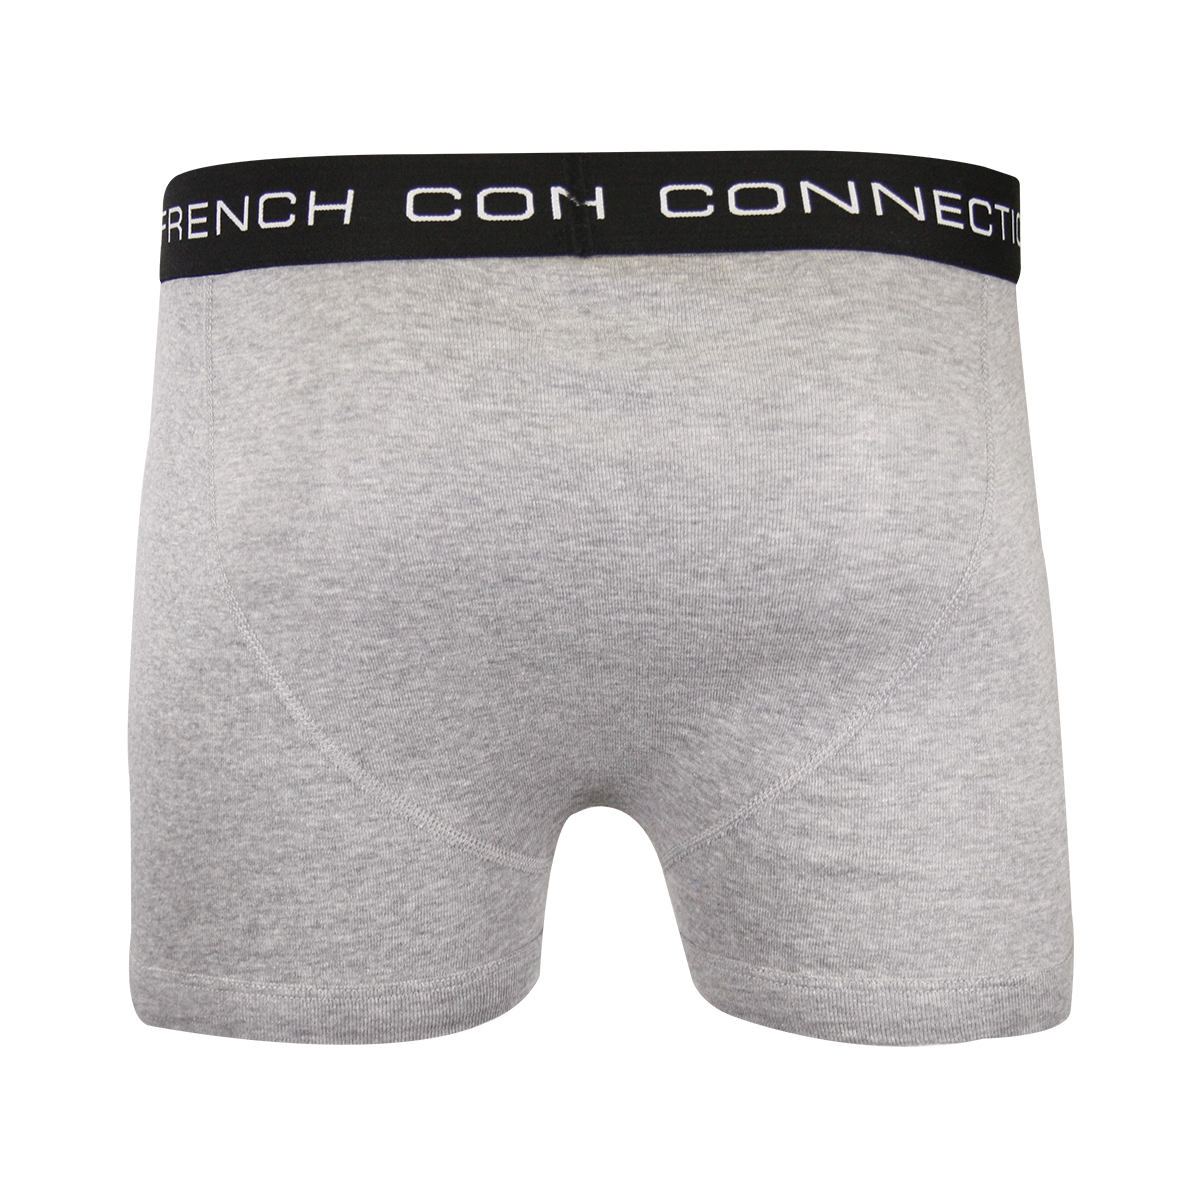 French Connection Men's 3 Pack Grey w/ Black Strap Boxer Briefs (S13)